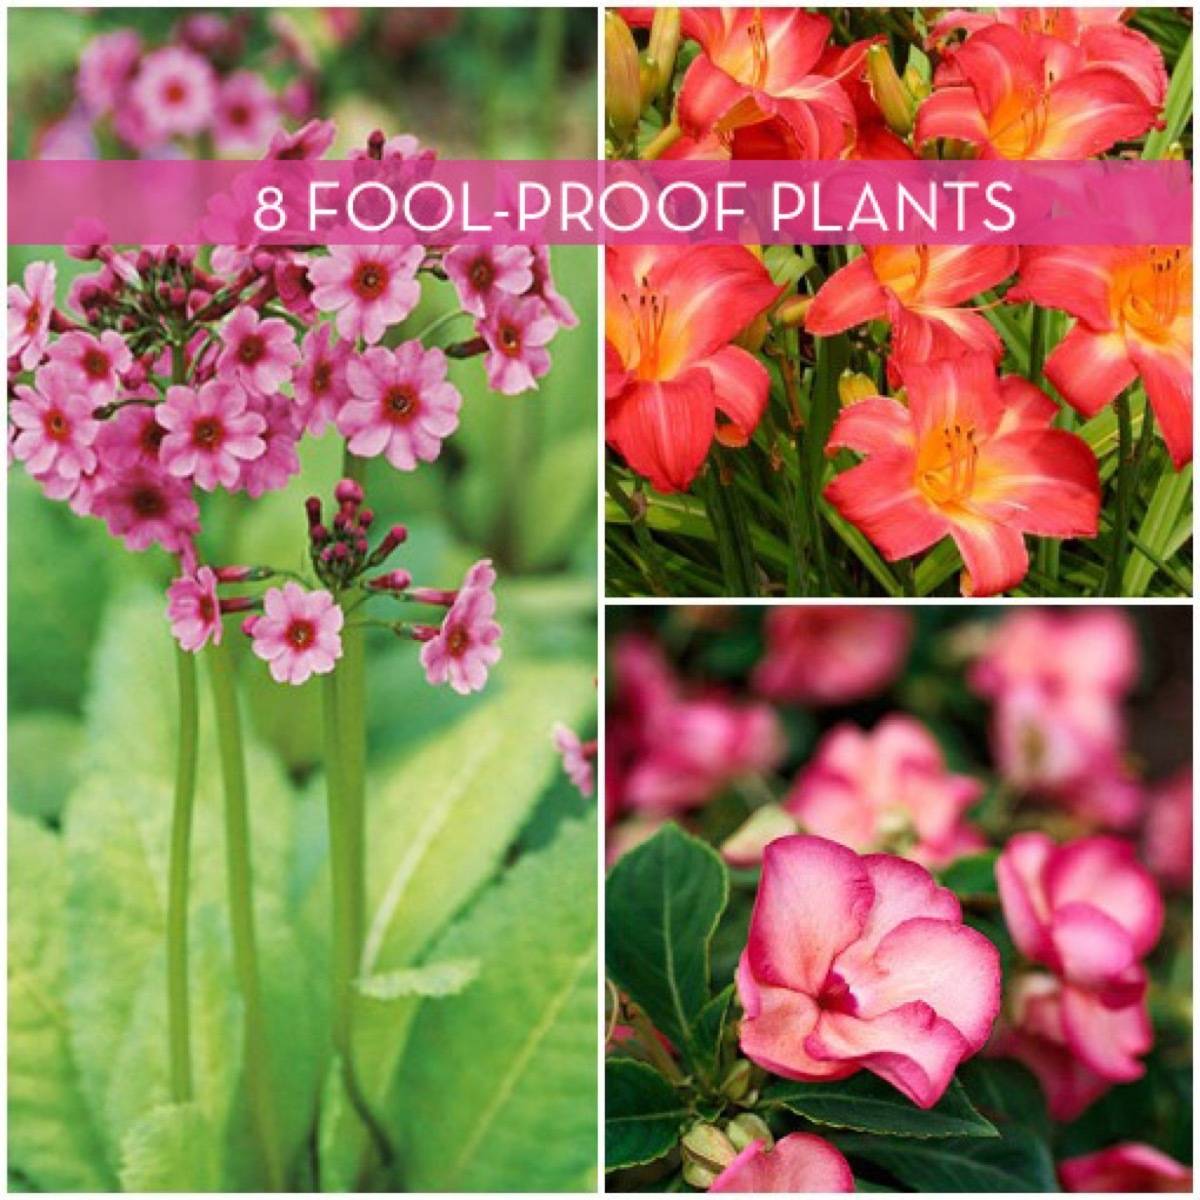 8 Low-Maintenance Outdoor Plants for the Busy Gardener